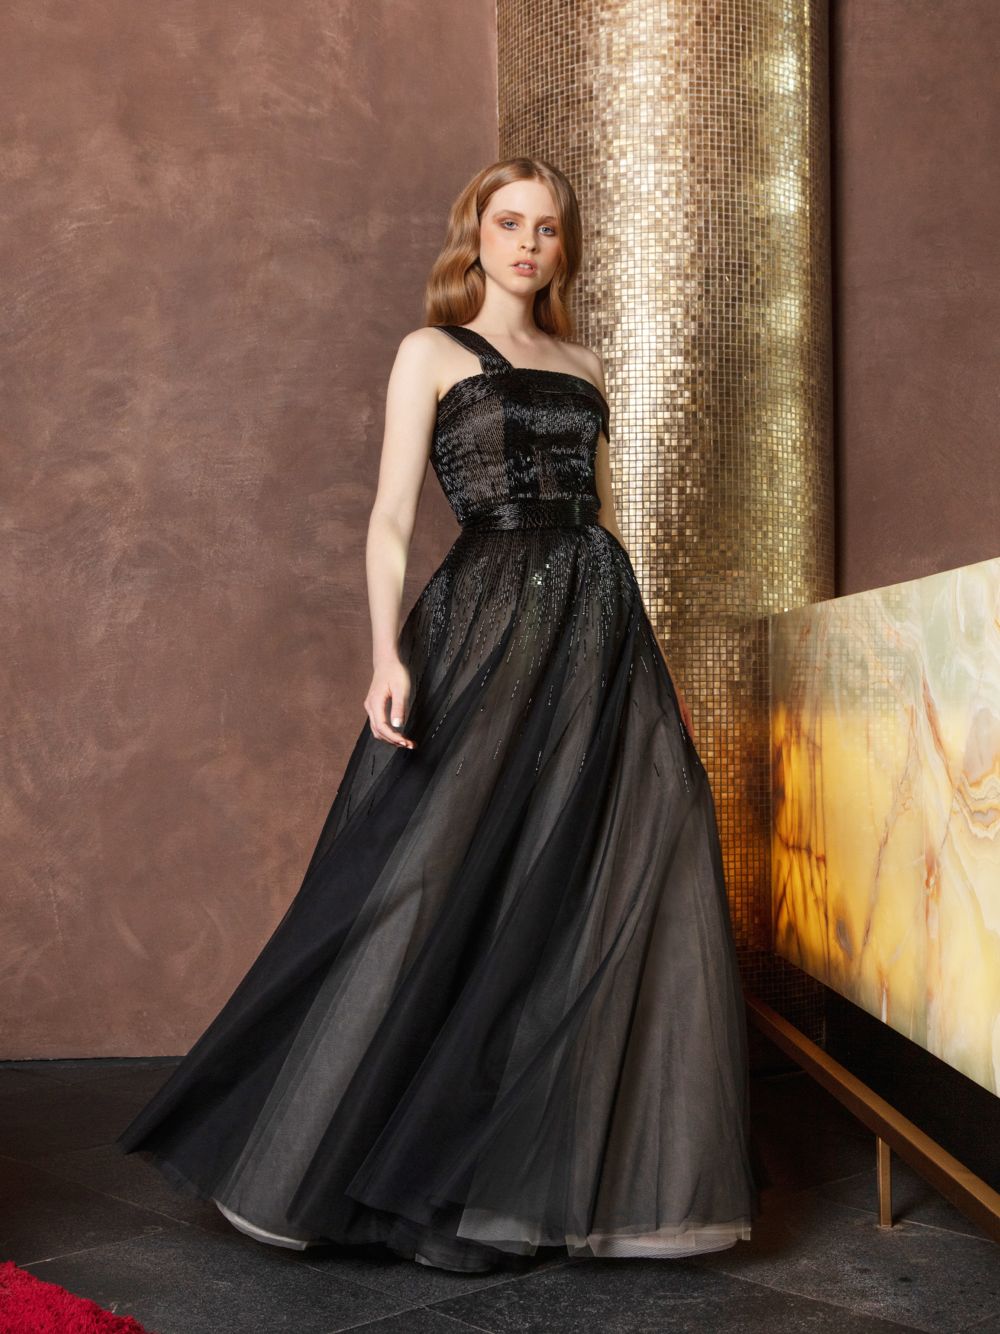 Richly embellished tulle volume gown